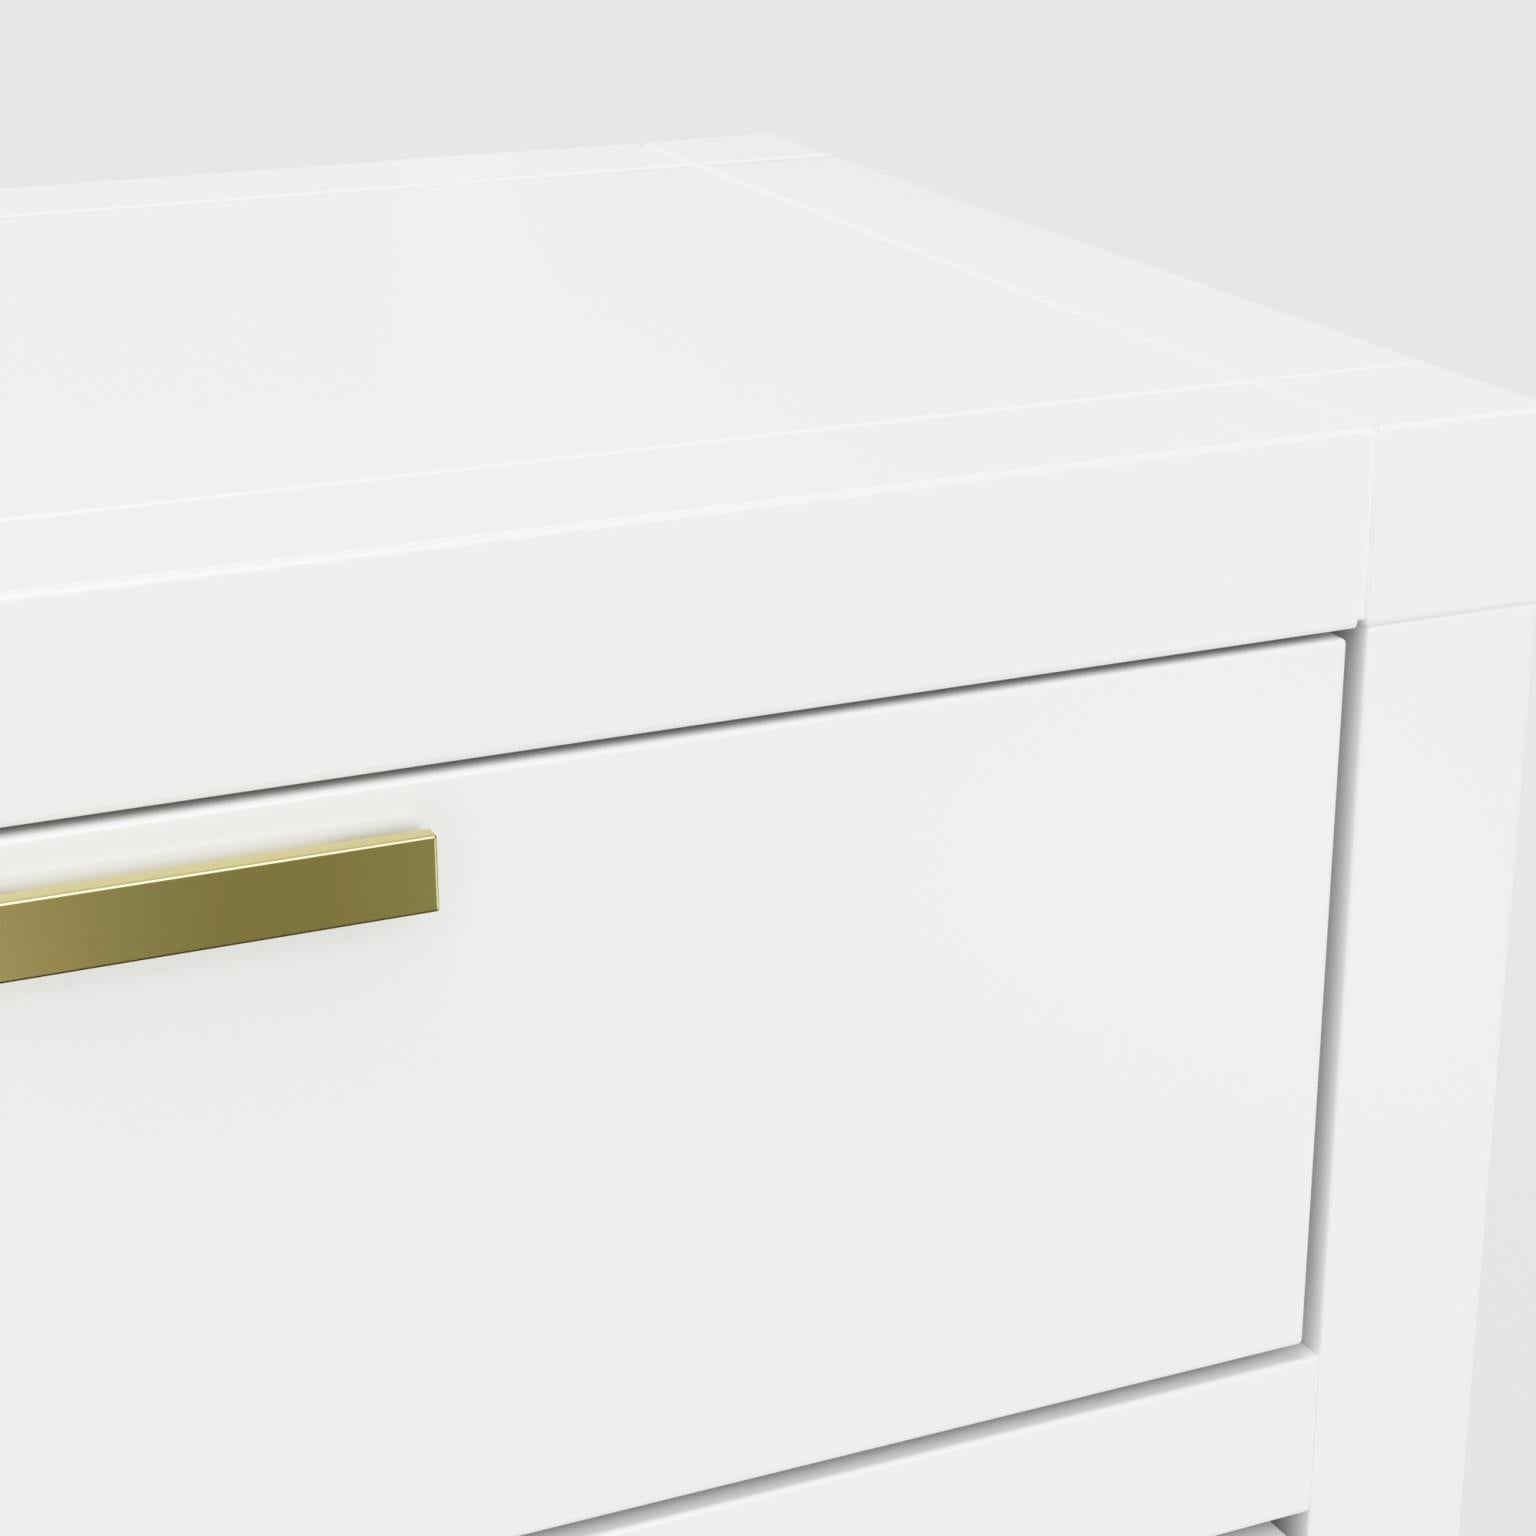 Carmel Collection Nightstand - White